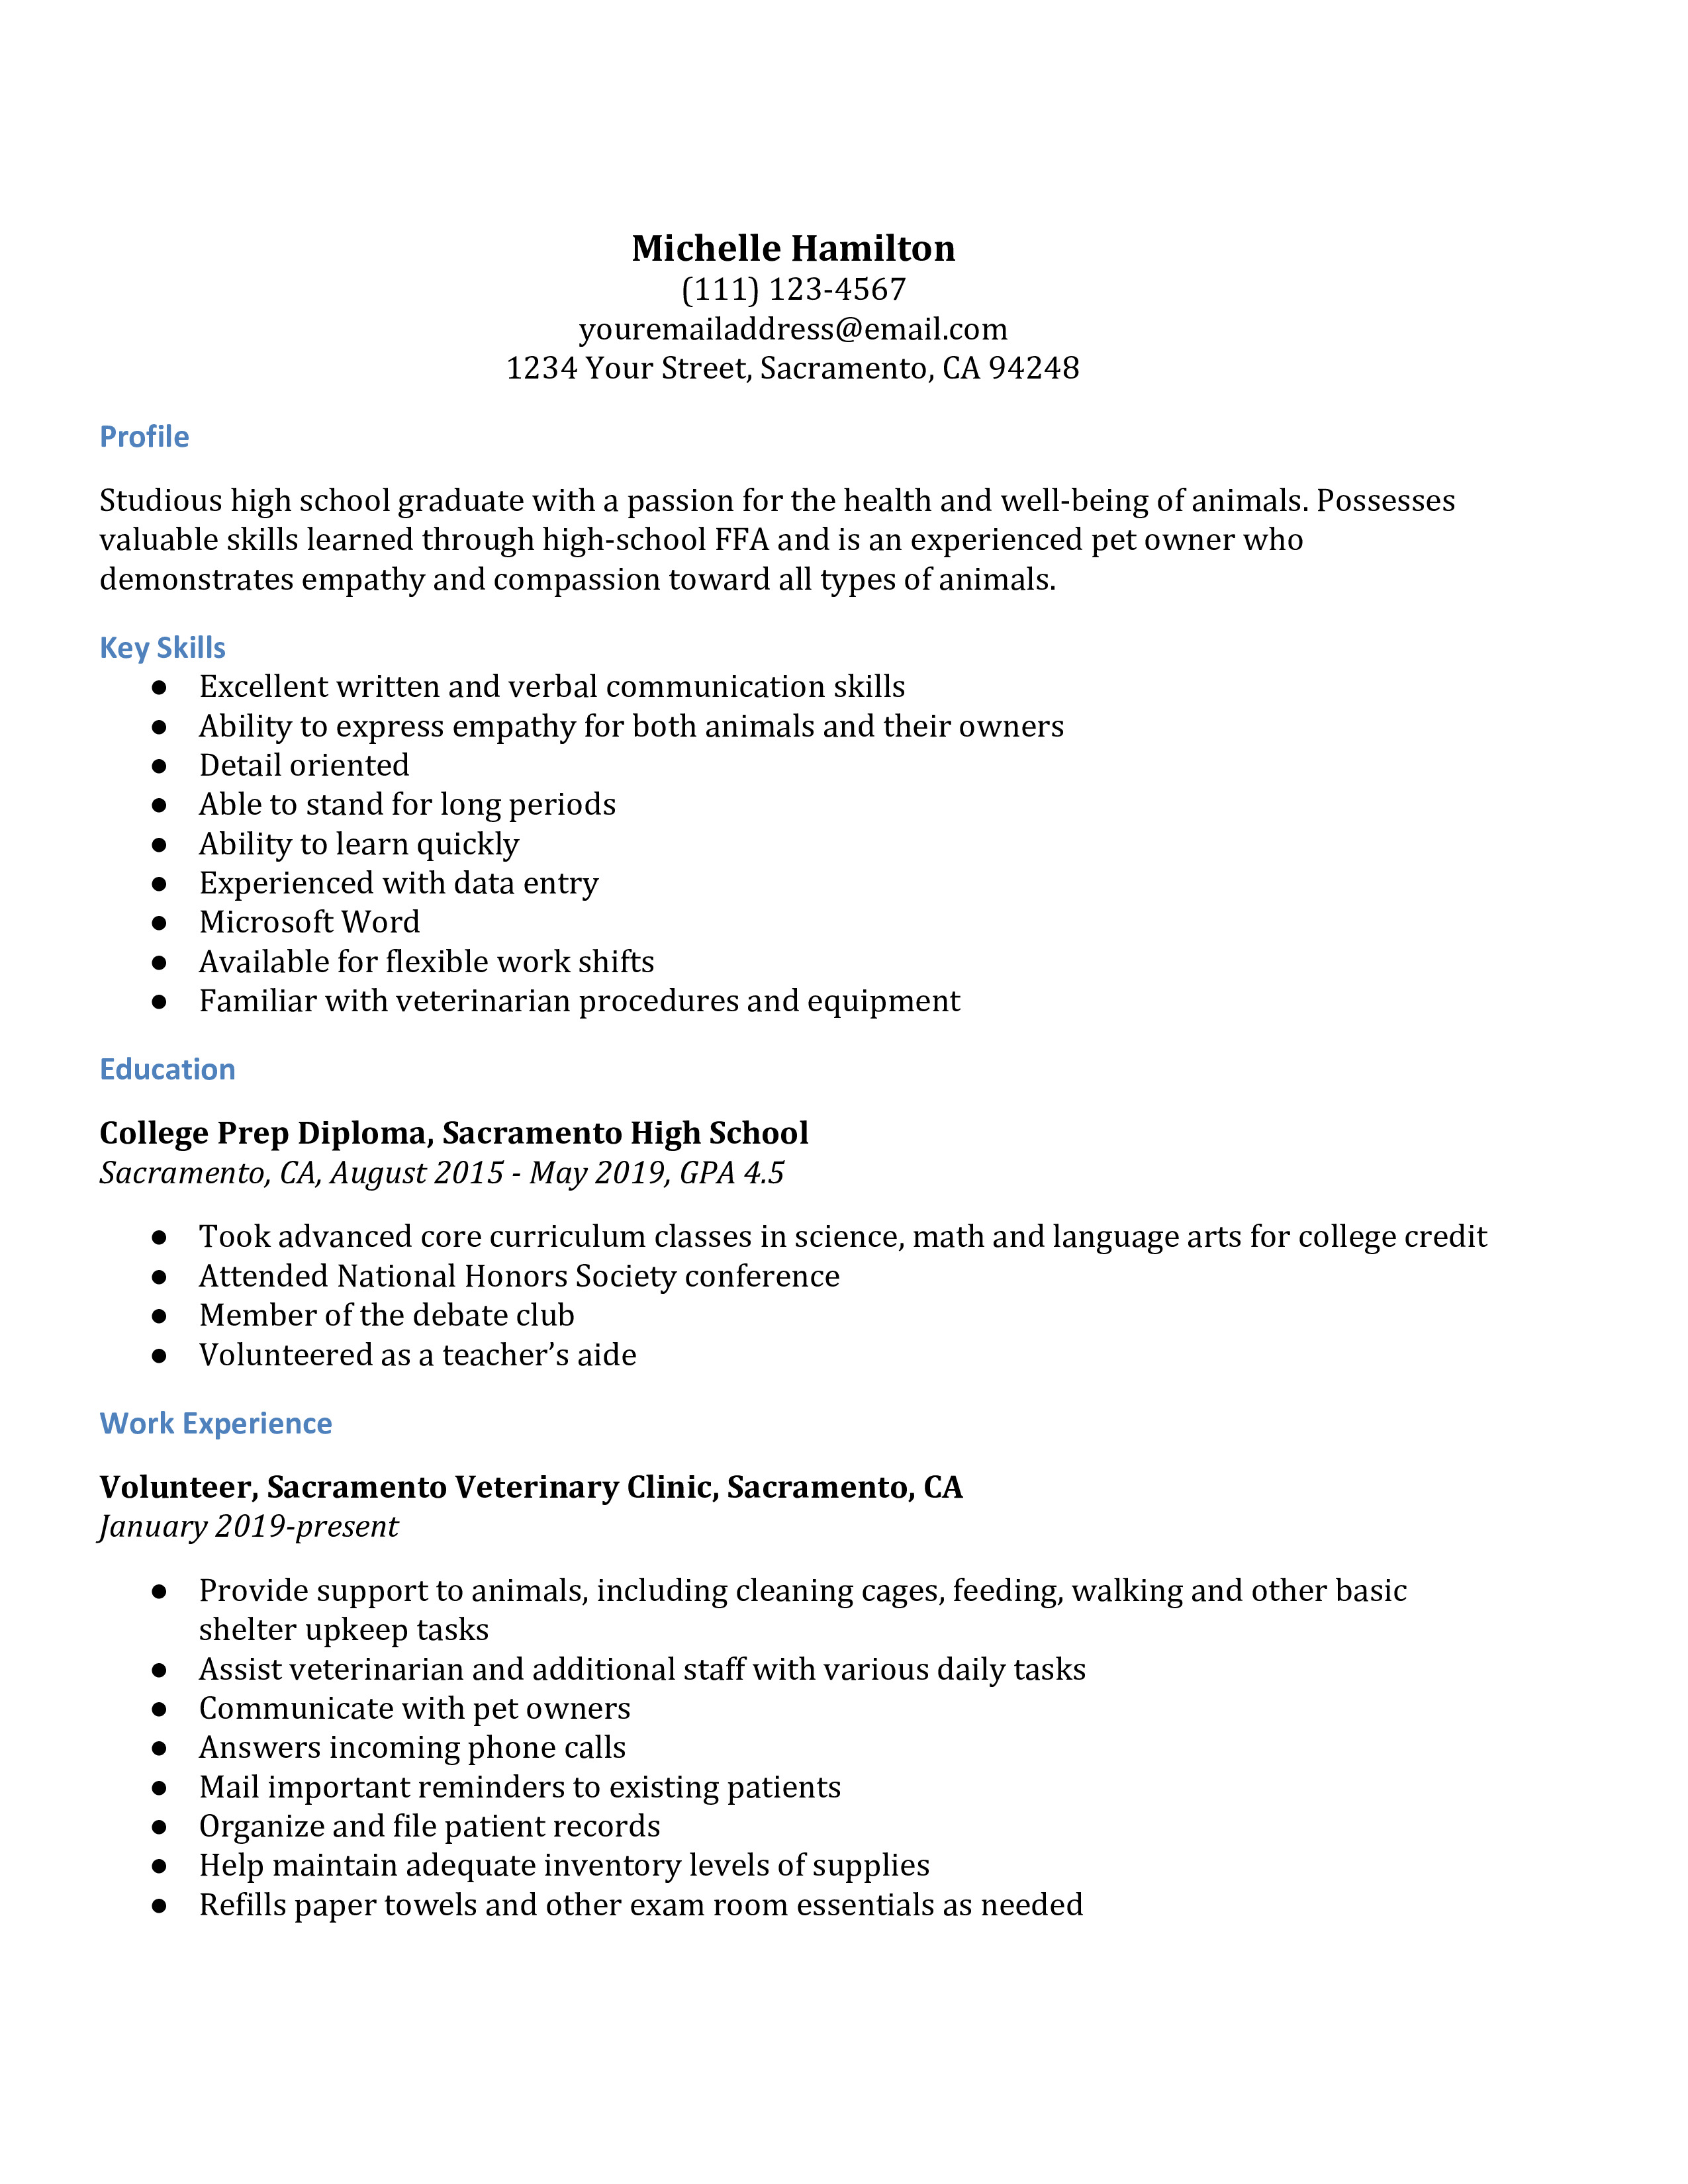 Core qualifications resume examples